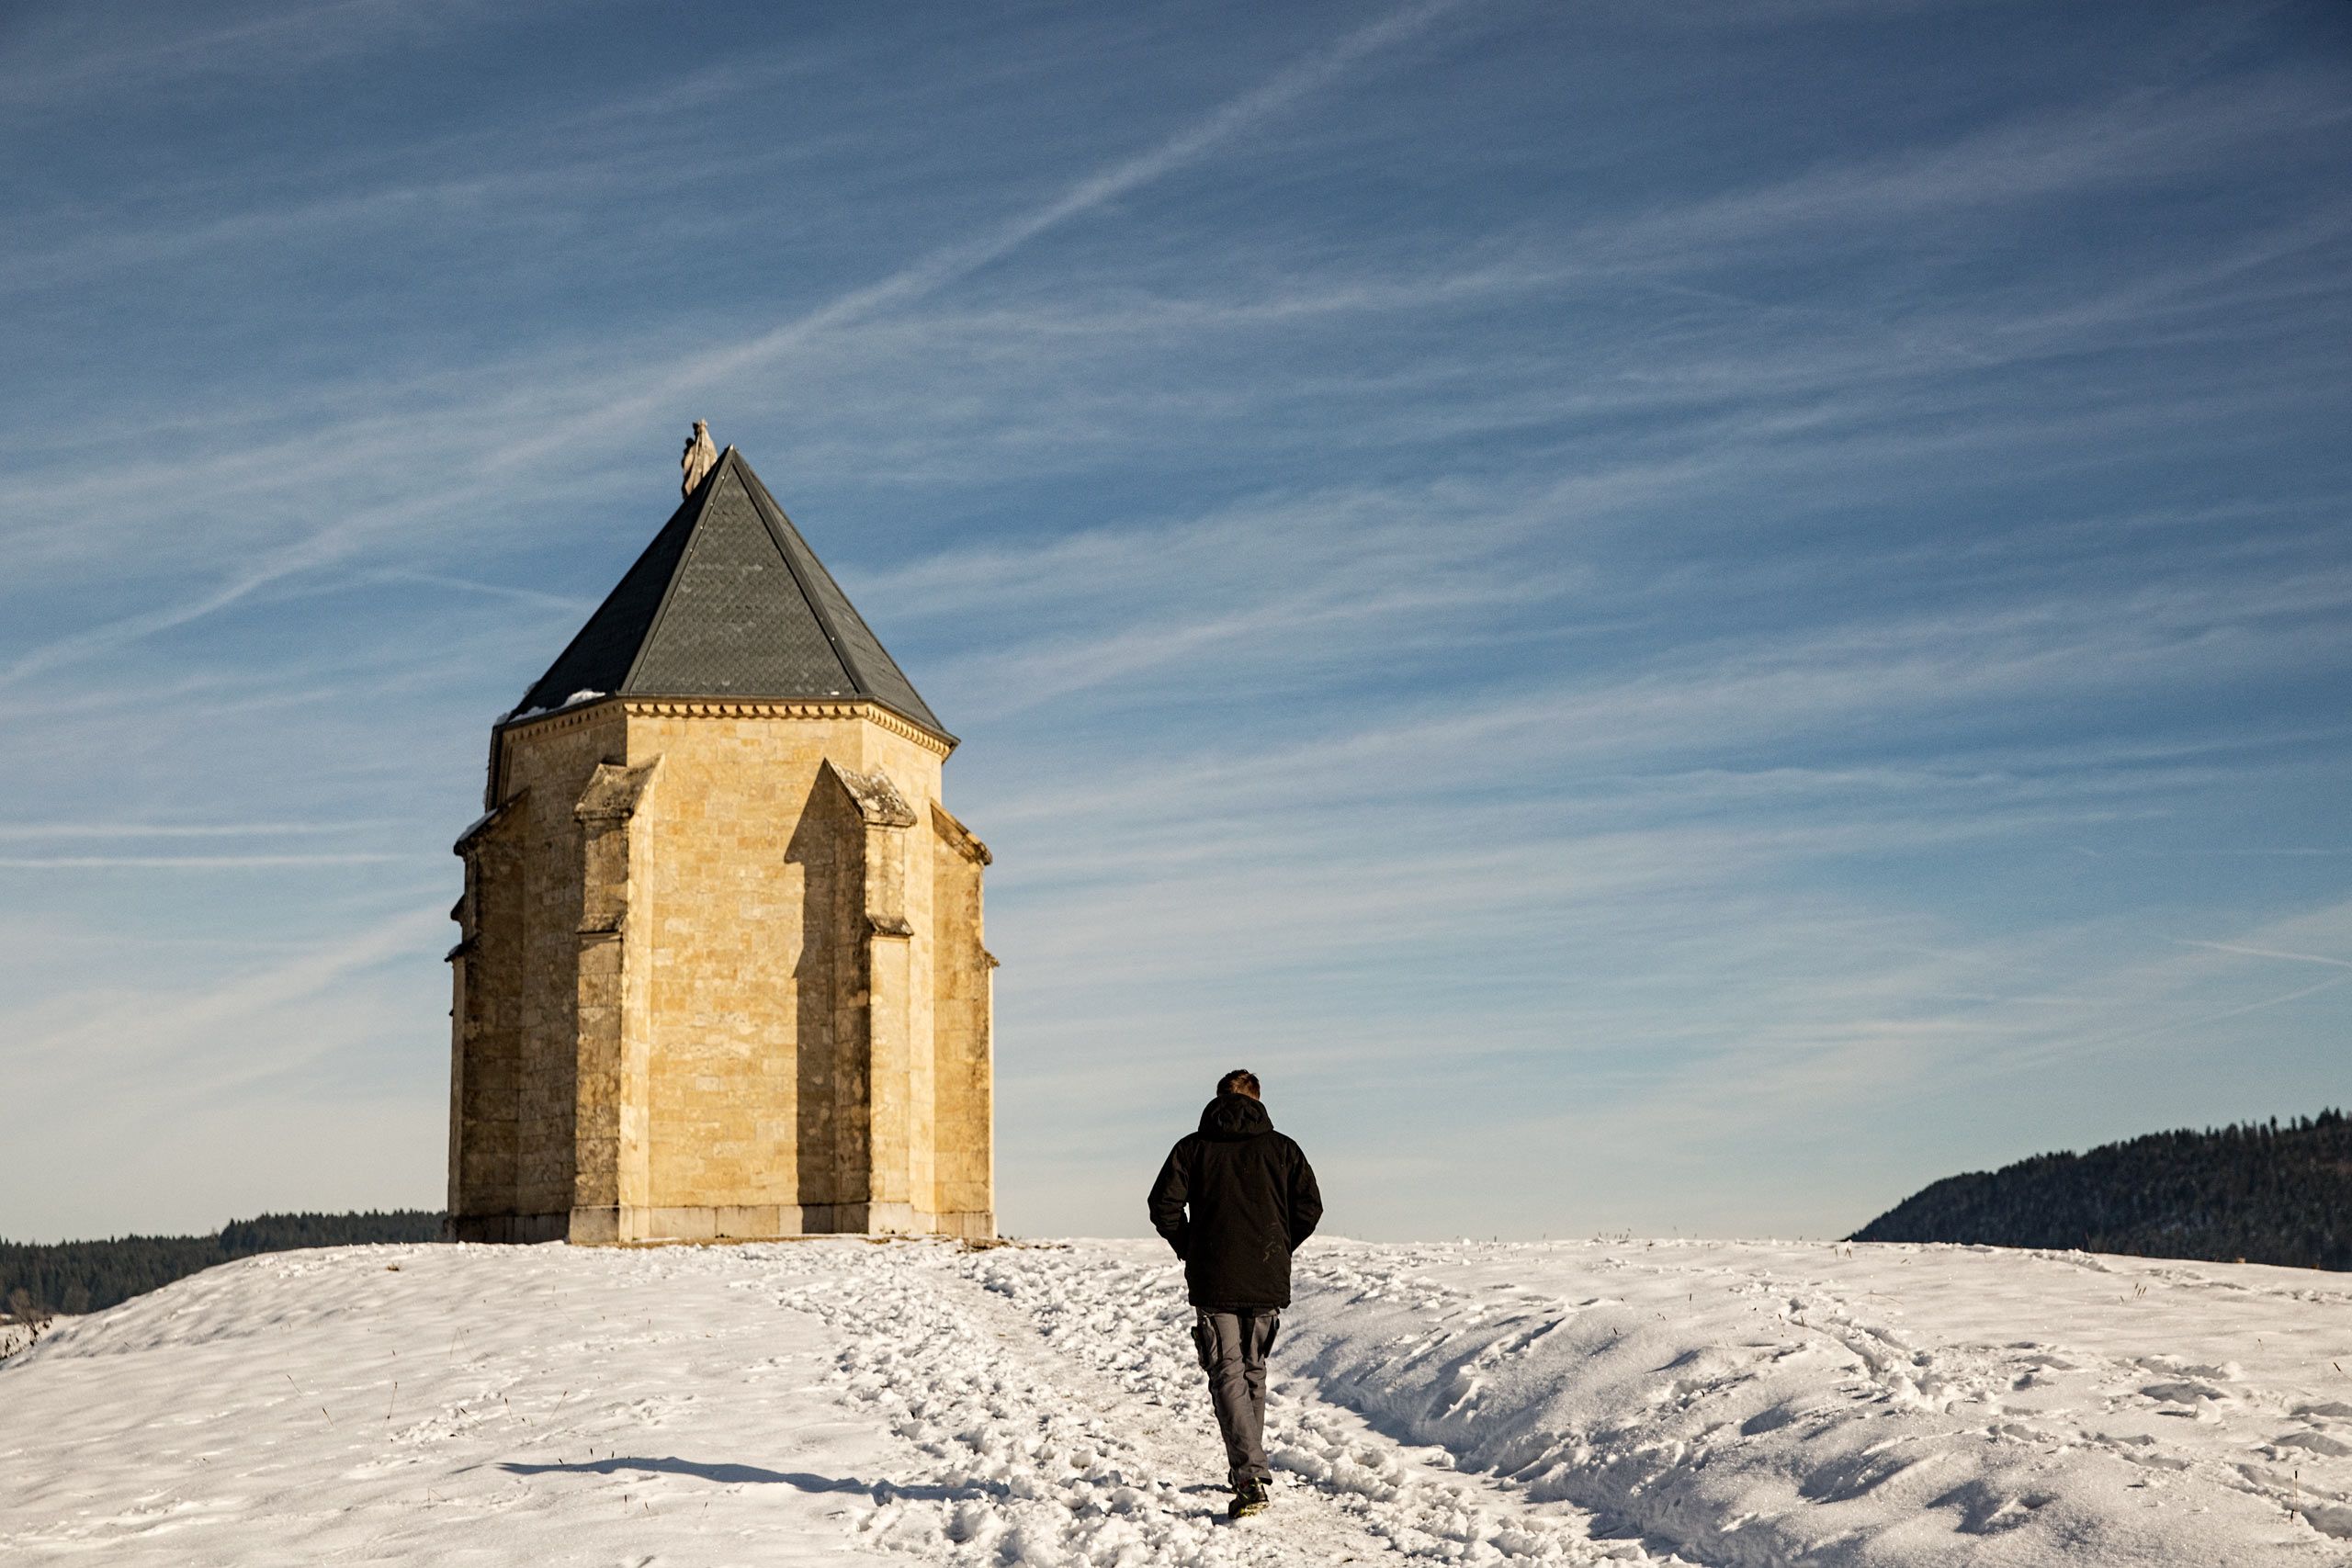 Man Walking In Snow To a Tiny Church